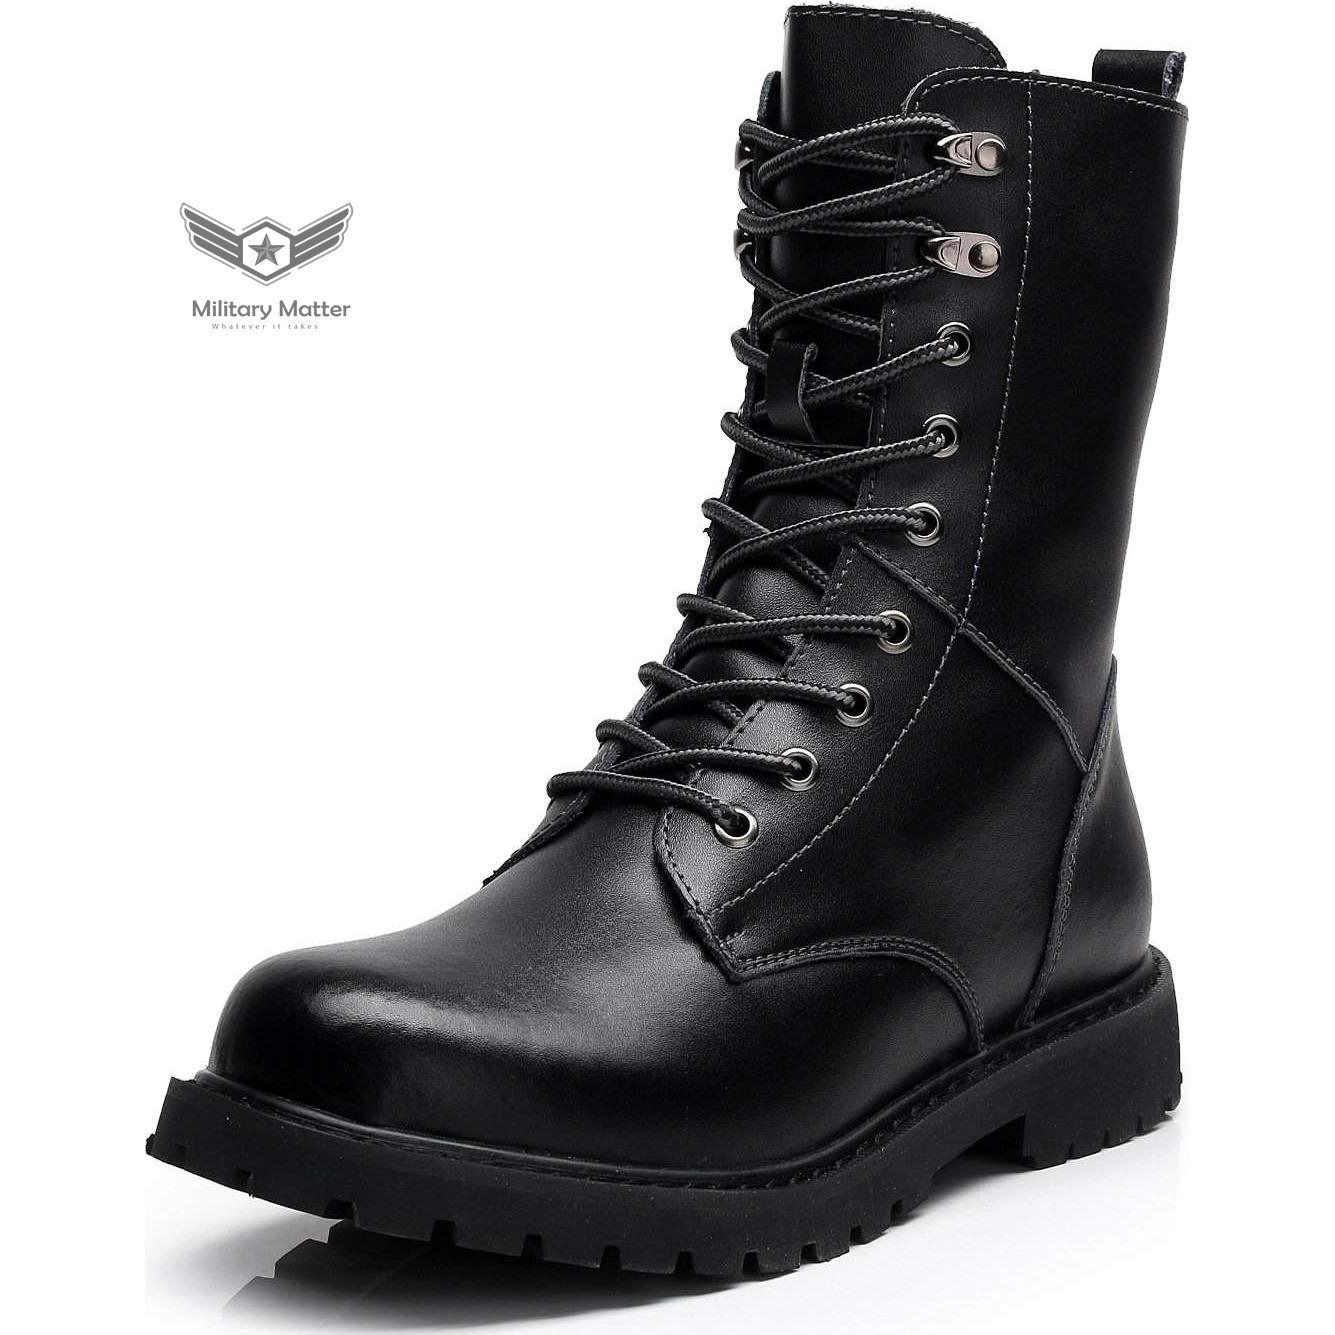  Military Matter Winter leather military Martin boots plus fleece | The Best CS Tactical Clothing Store